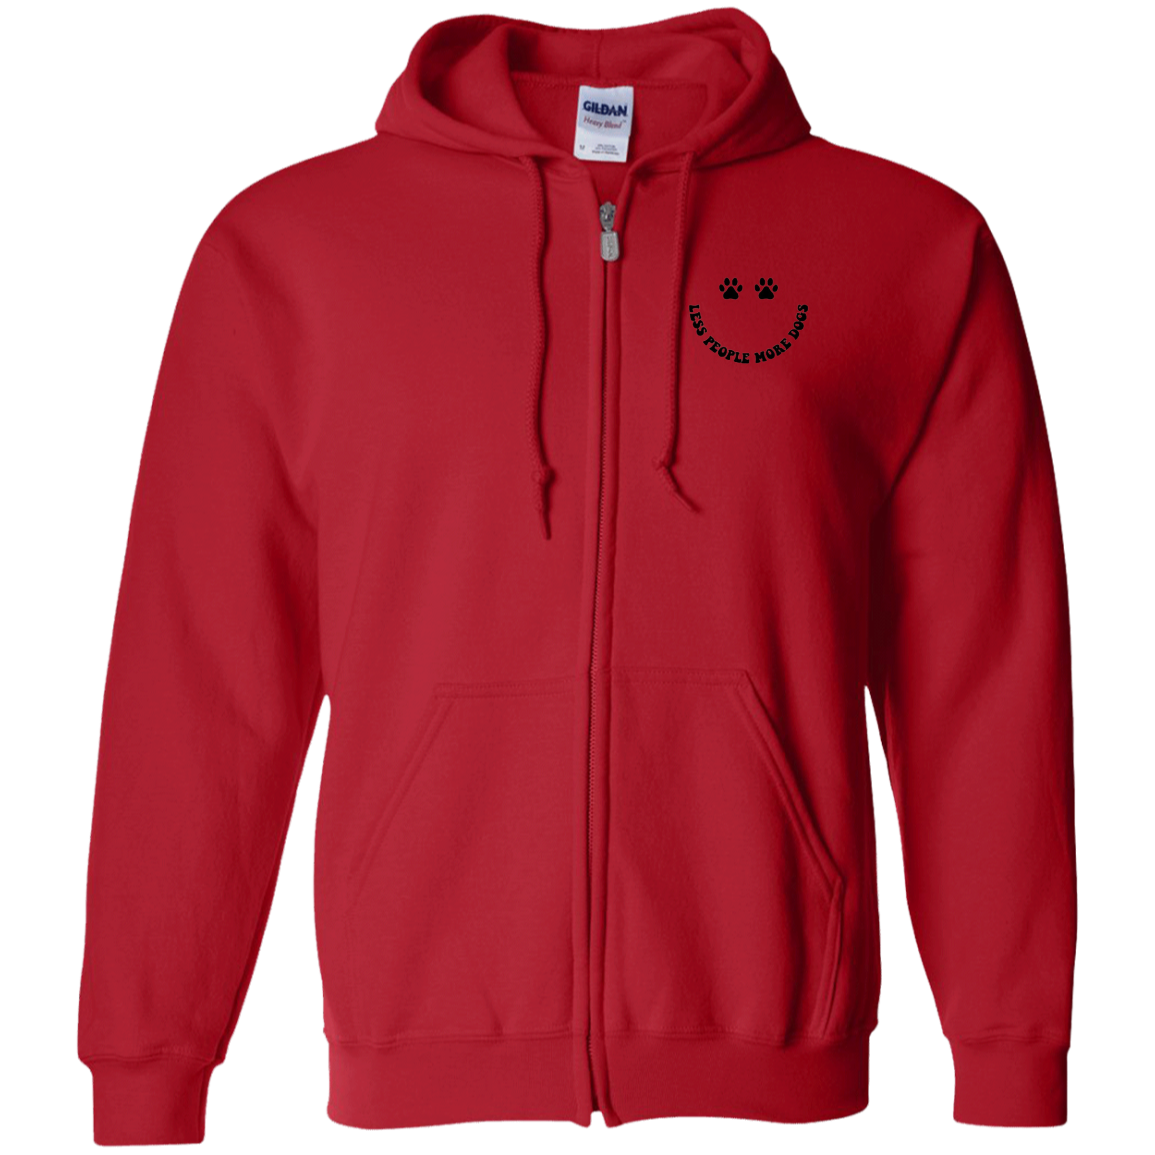 Less People More Dogs Zip Up Sweat Jacket